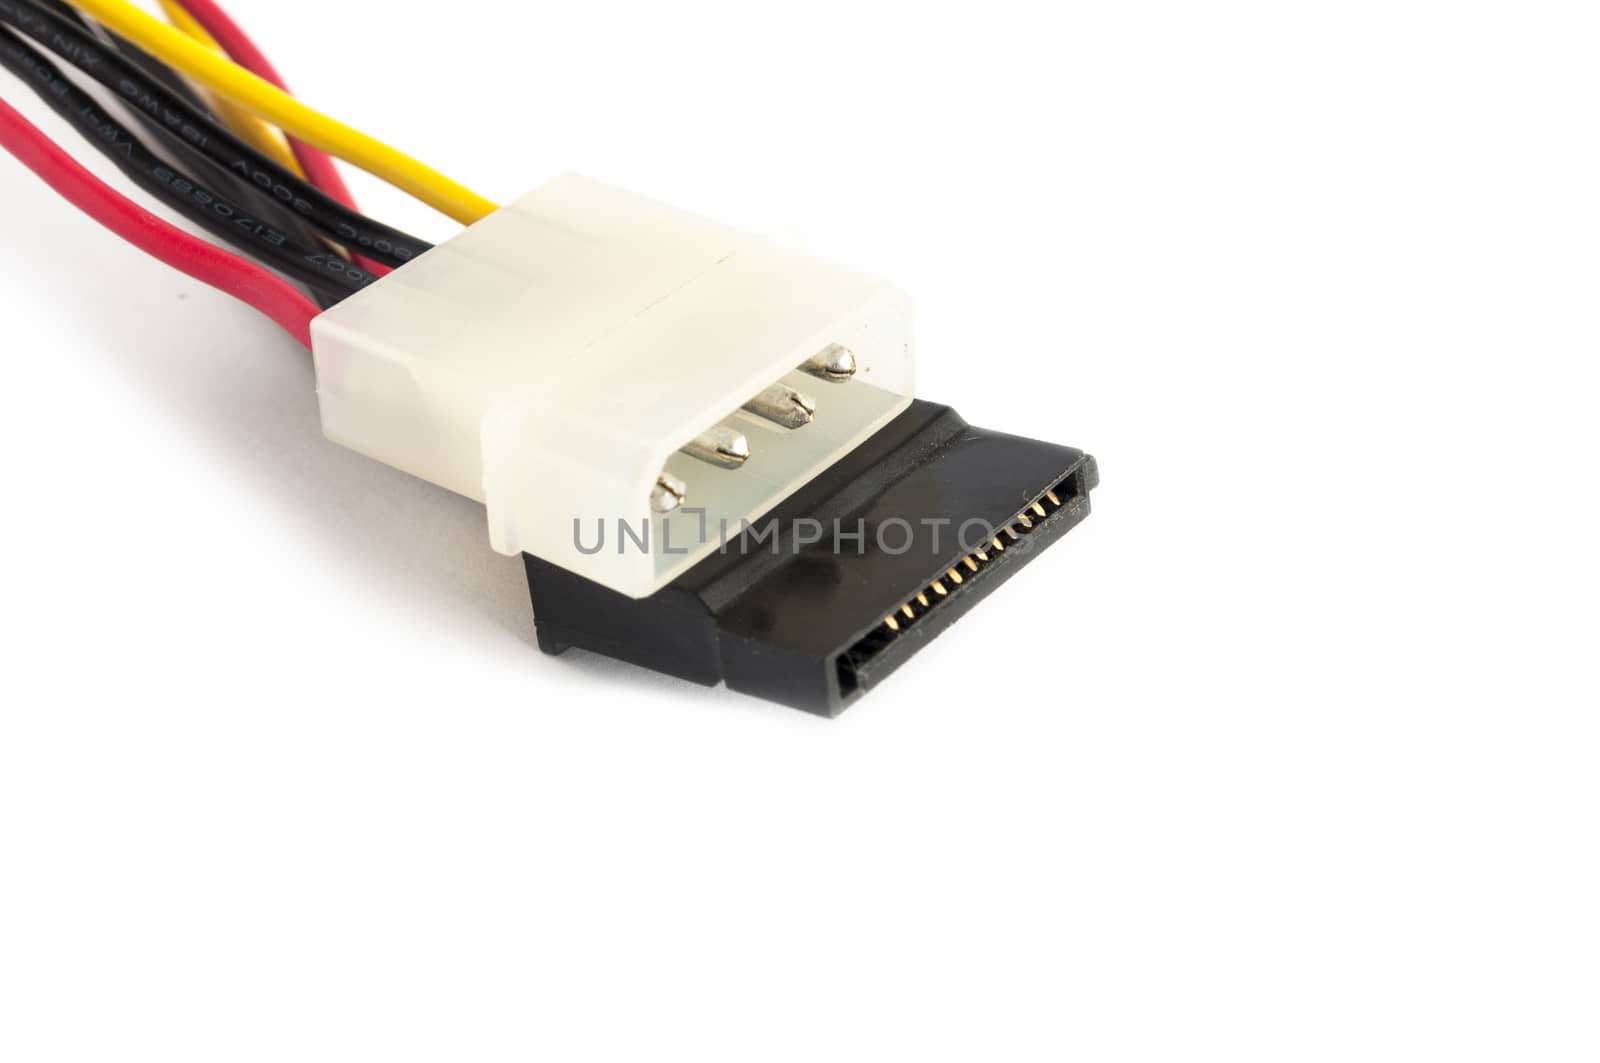 Hard disk drive power cables on a white background